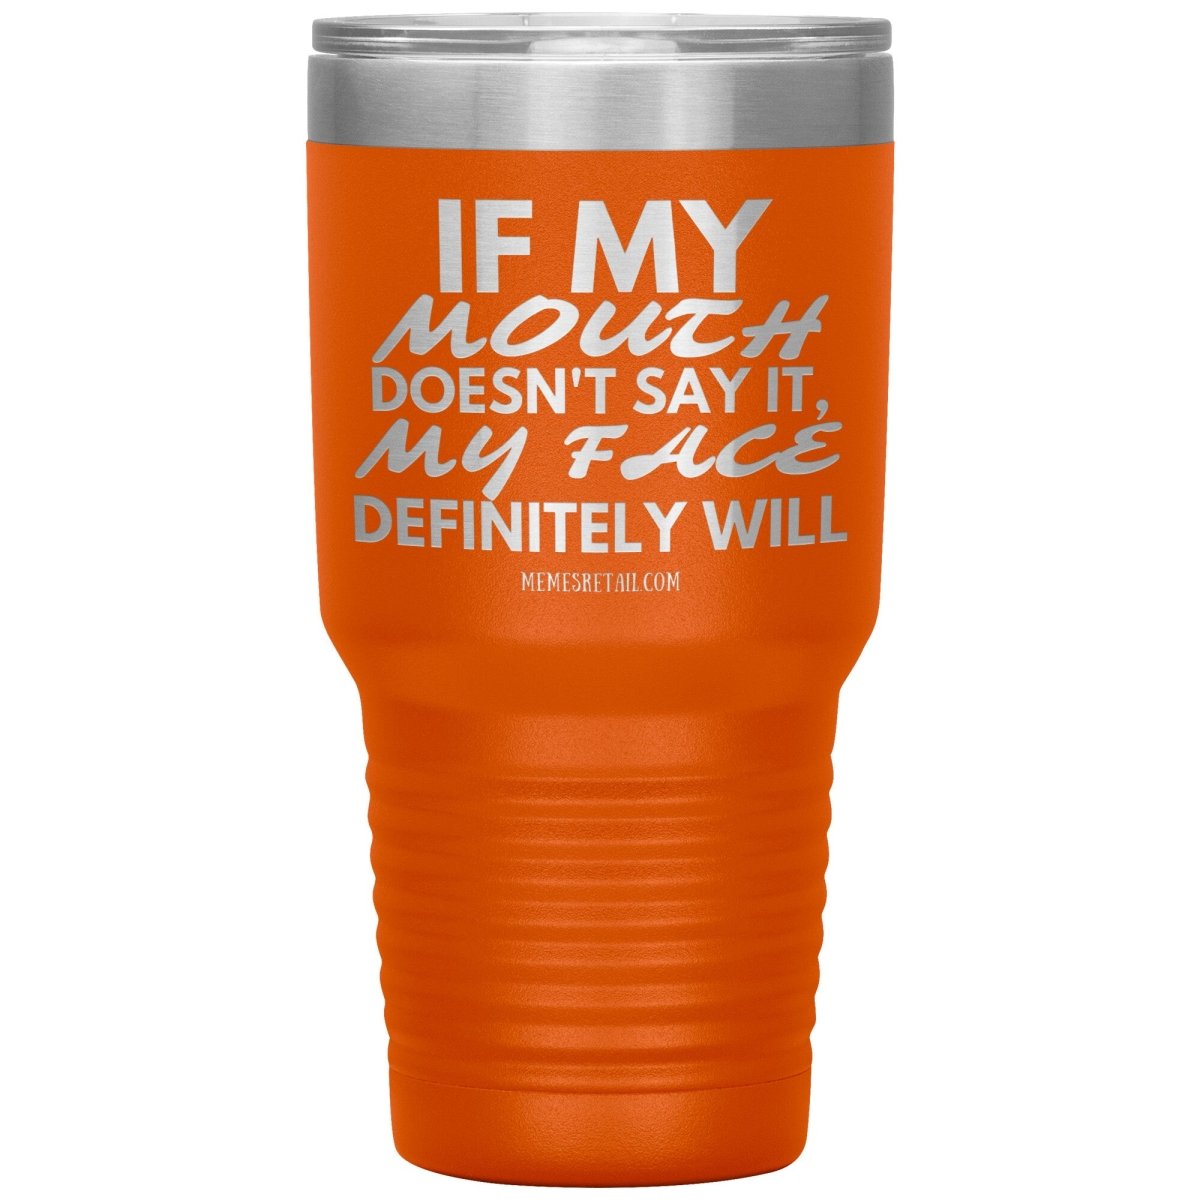 If my mouth doesn't say it, my face definitely will Tumblers, 30oz Insulated Tumbler / Orange - MemesRetail.com